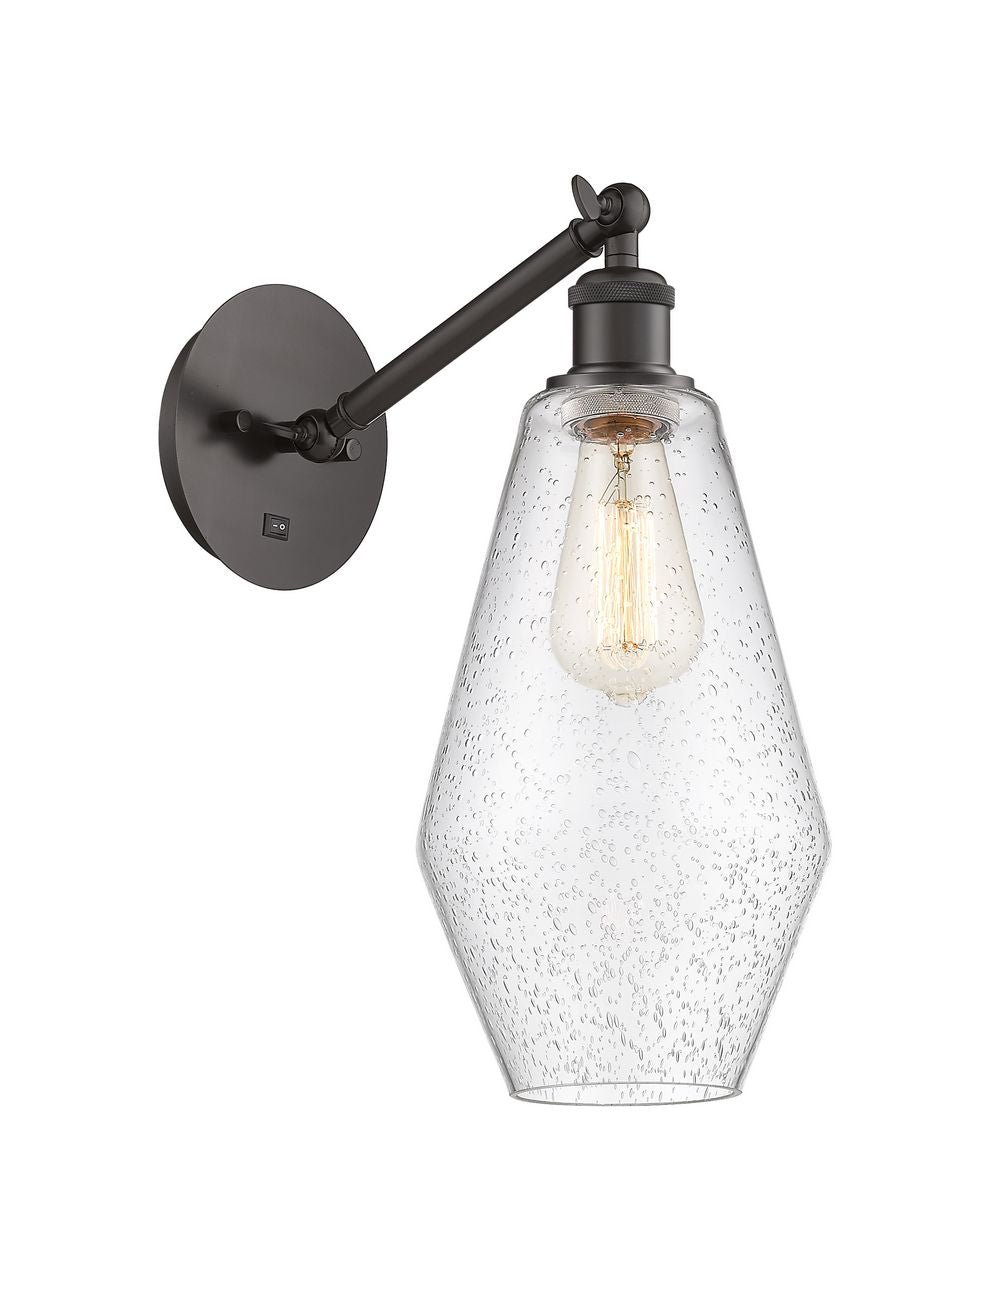 317-1W-OB-G654-7 1-Light 7" Oil Rubbed Bronze Sconce - Seedy Cindyrella 7" Glass - LED Bulb - Dimmensions: 7 x 13.25 x 16 - Glass Up or Down: Yes